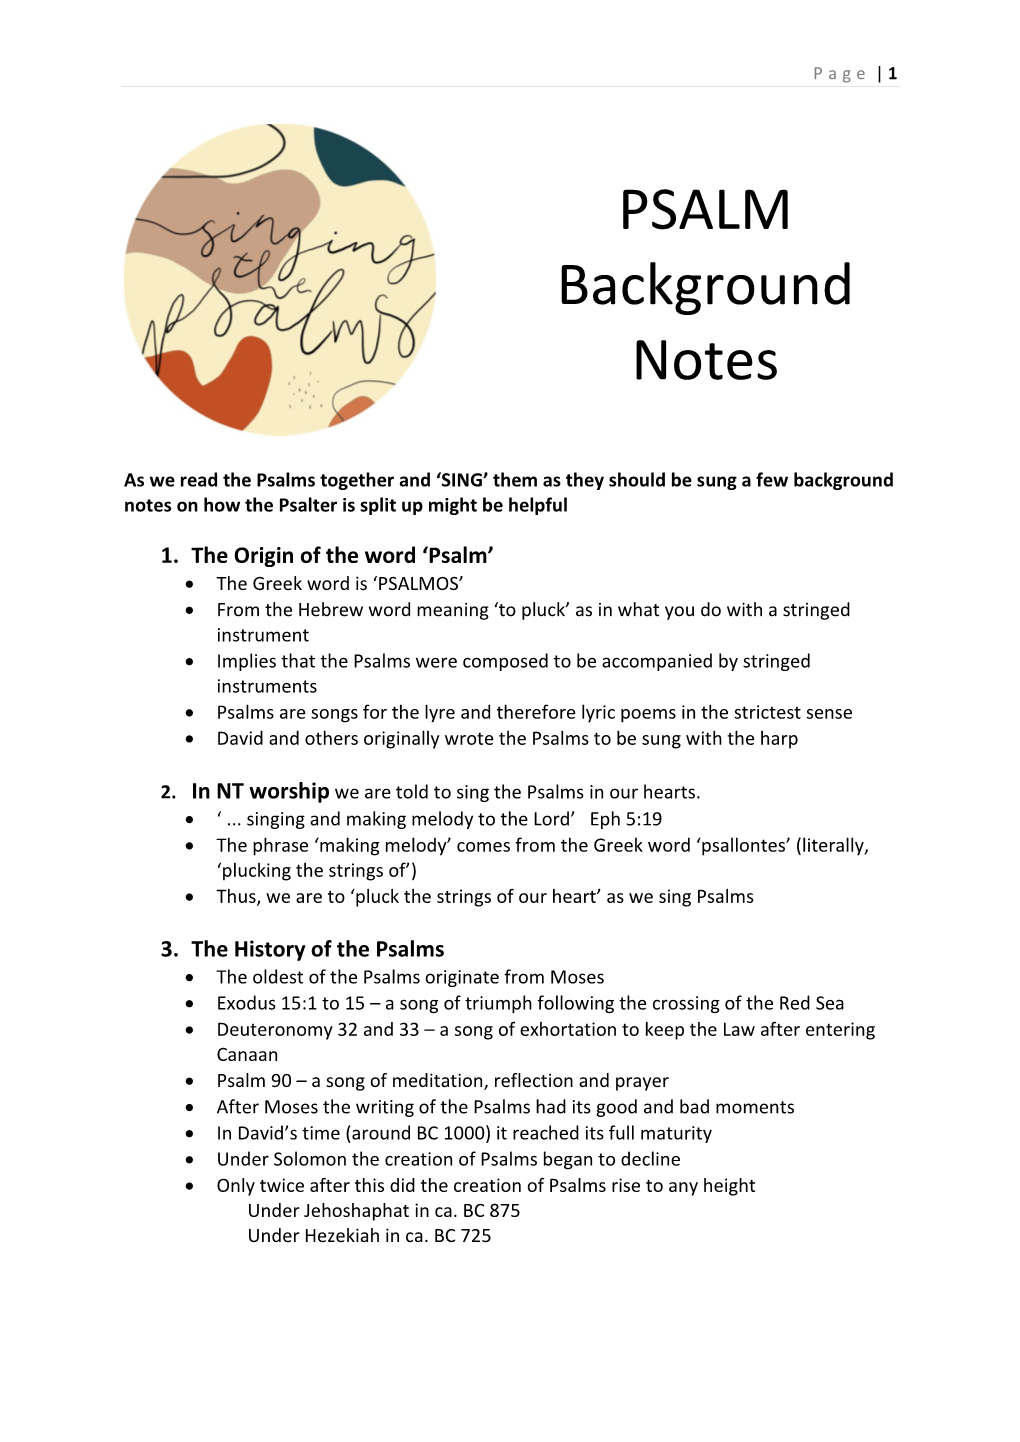 PSALM Background Notes